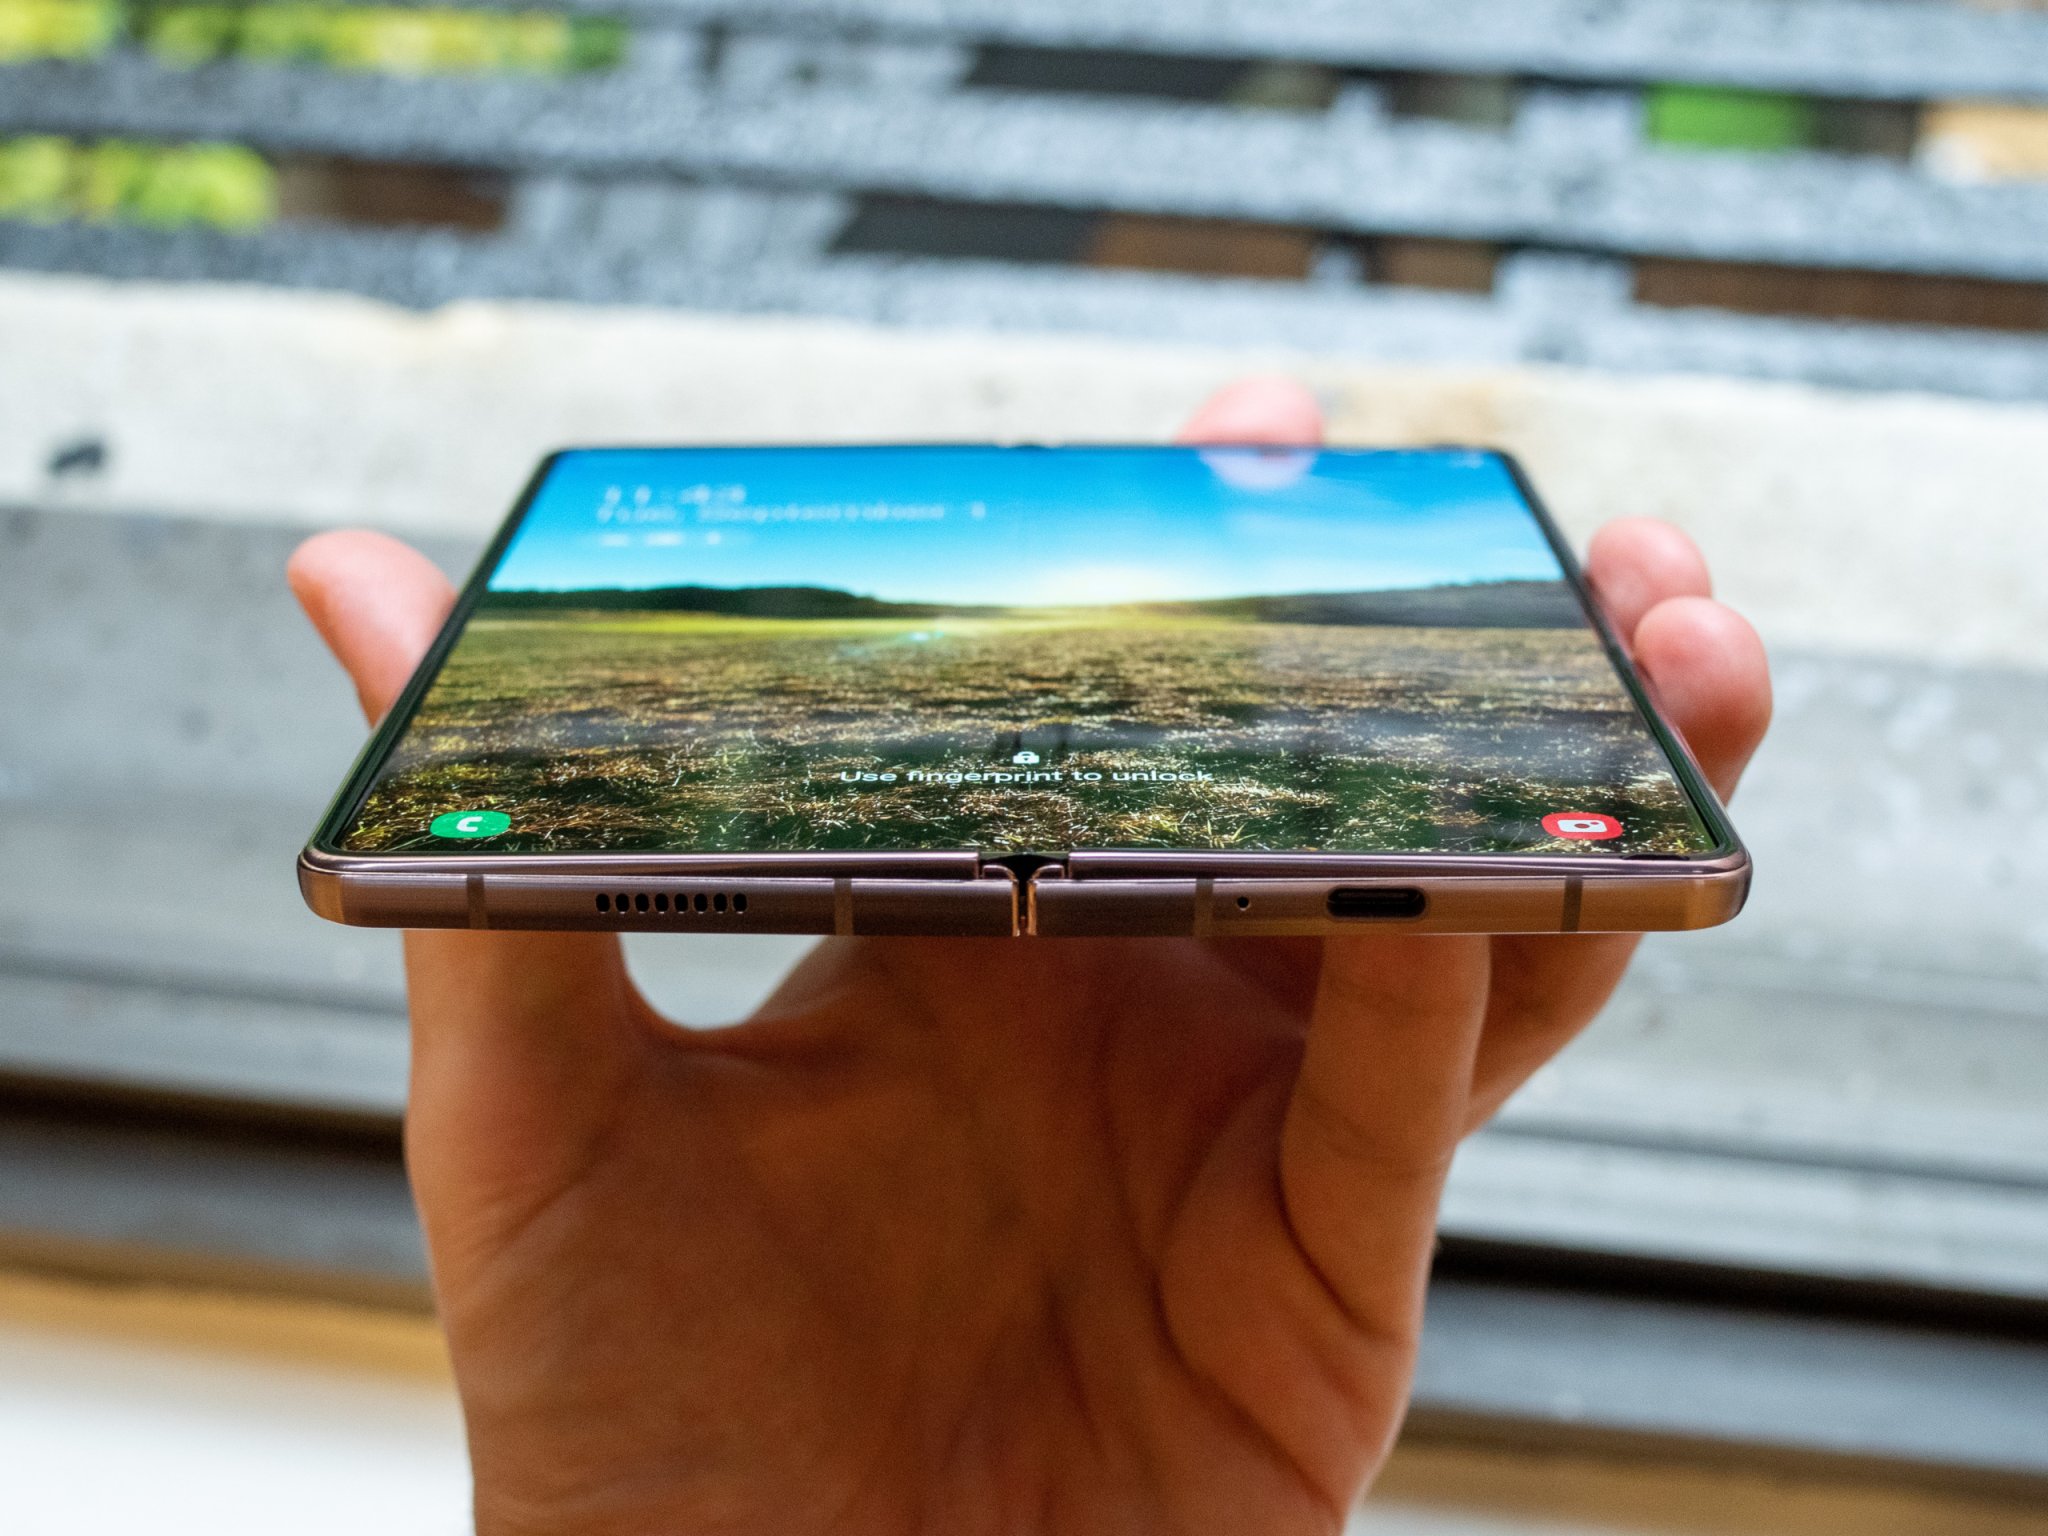 Samsung Galaxy Z Fold 2 review: A fully functional foldable